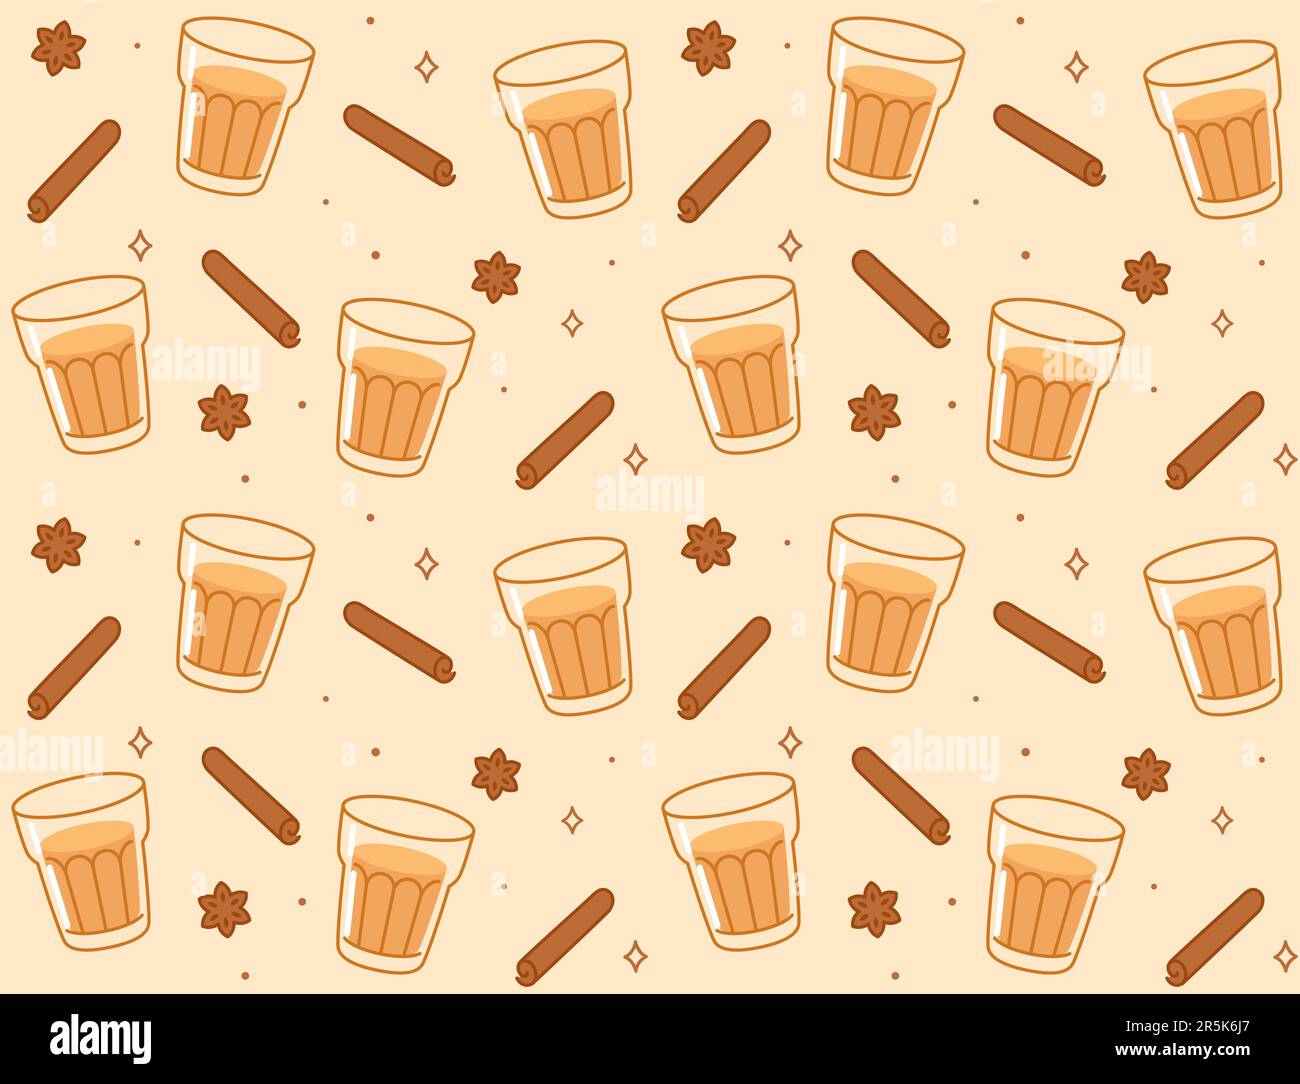 Masala chai tea seamless pattern. Doodle drawings of Indian tea glass and spices: cinnamon and cloves. Vector background illustration. Stock Vector